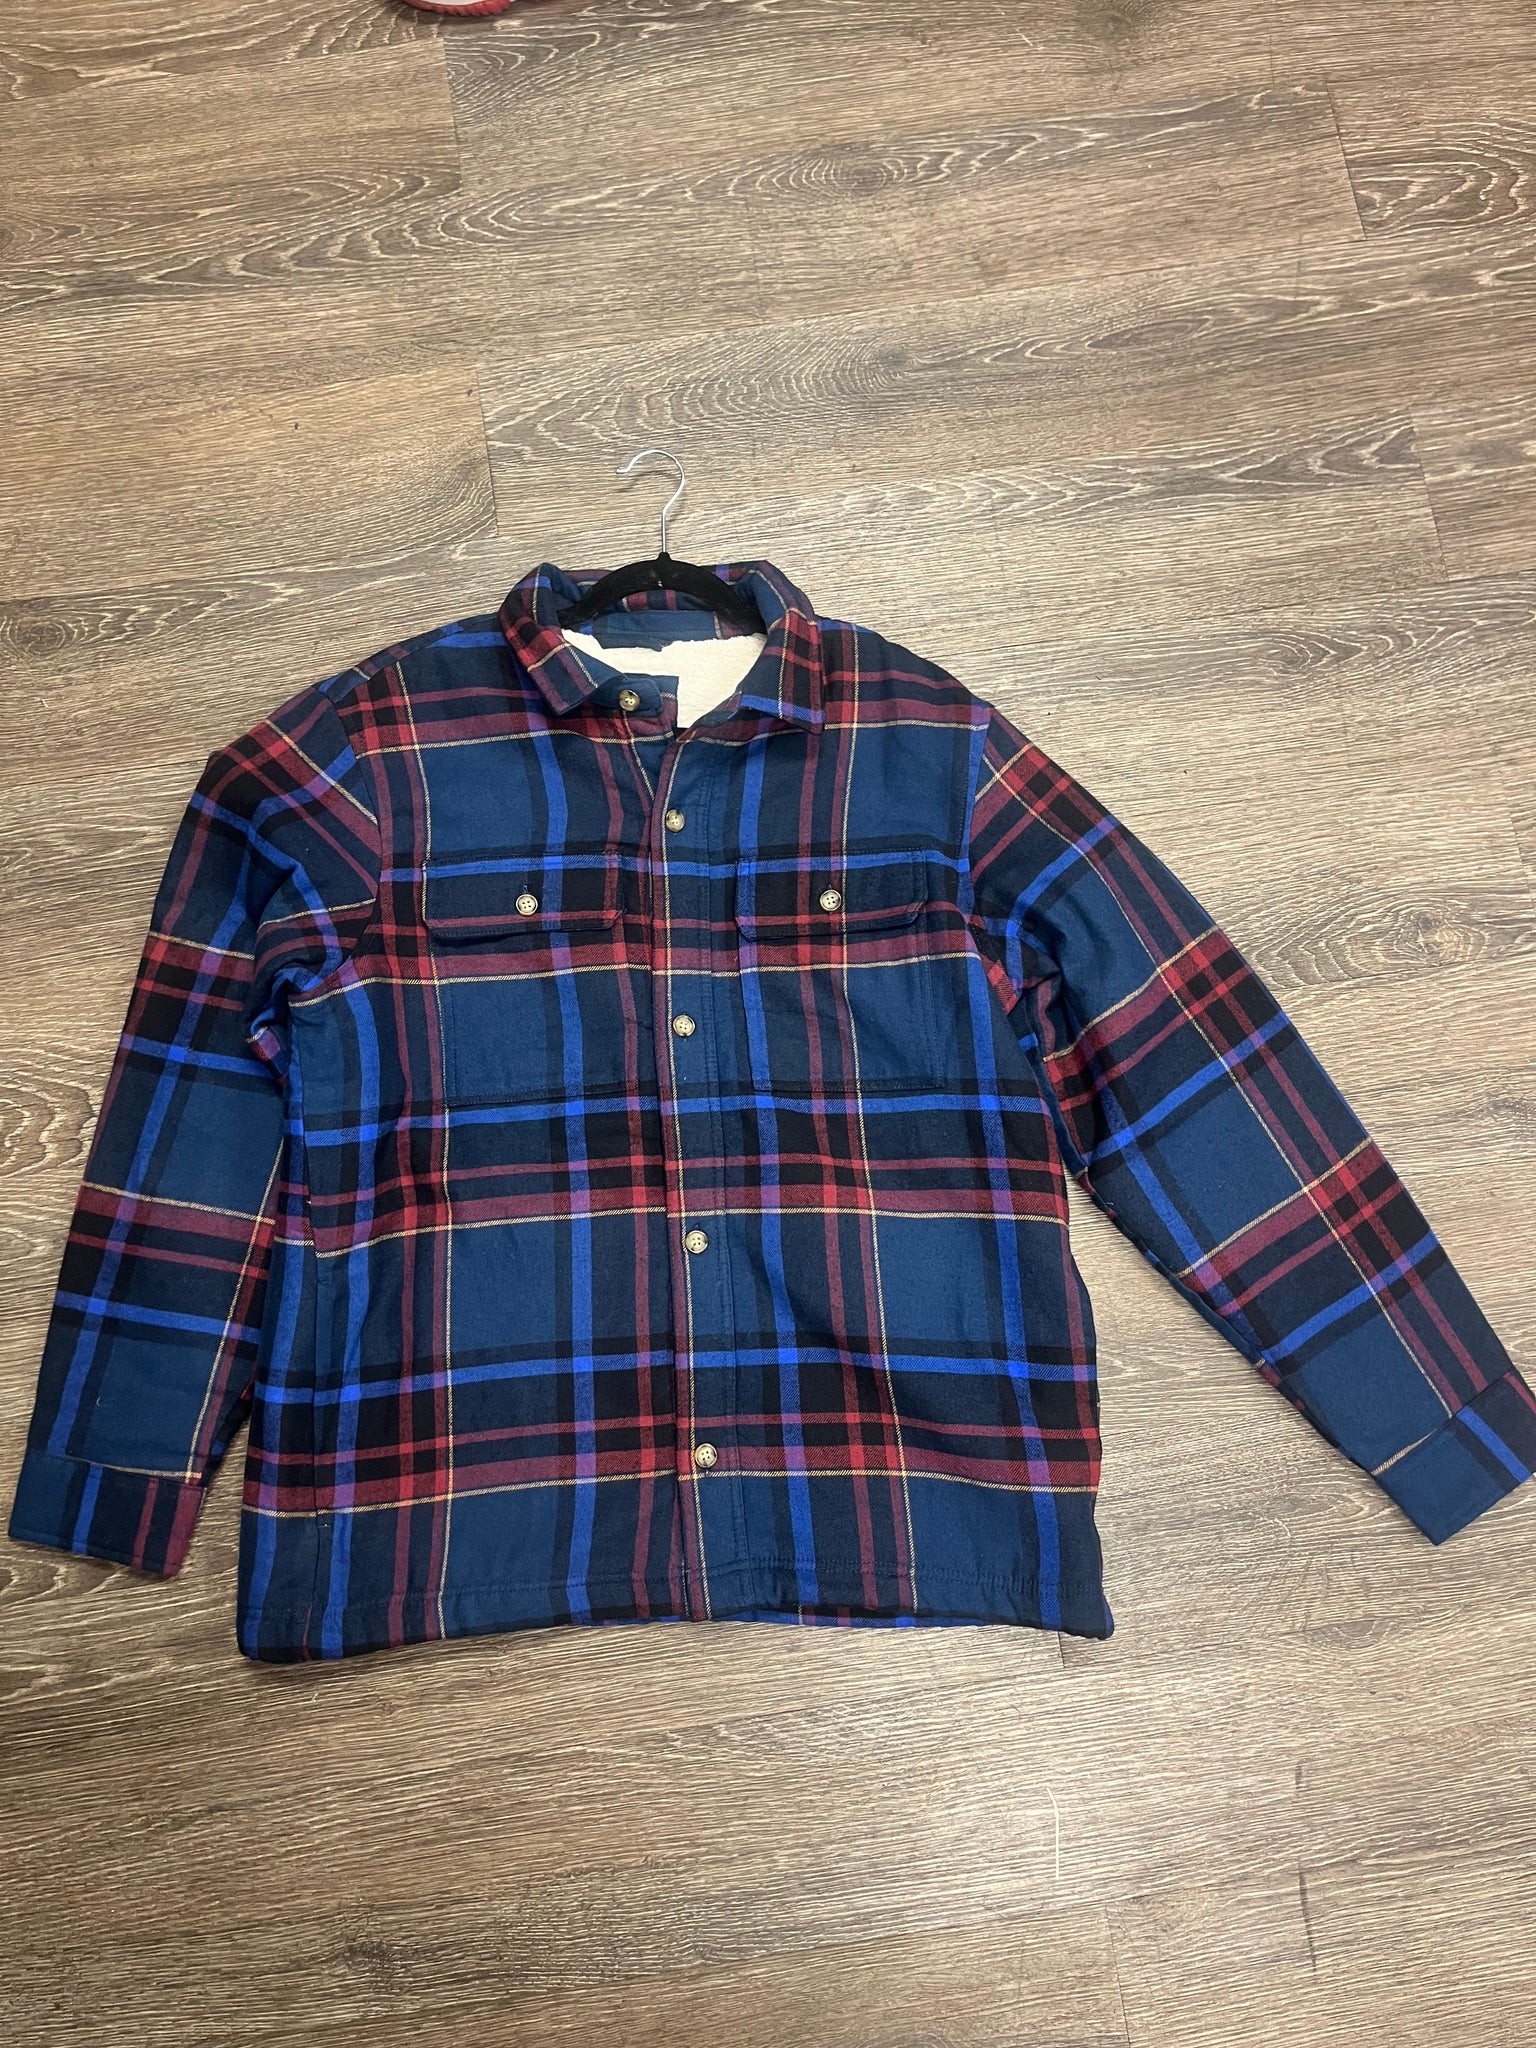 Red/ blue flannel (size large)